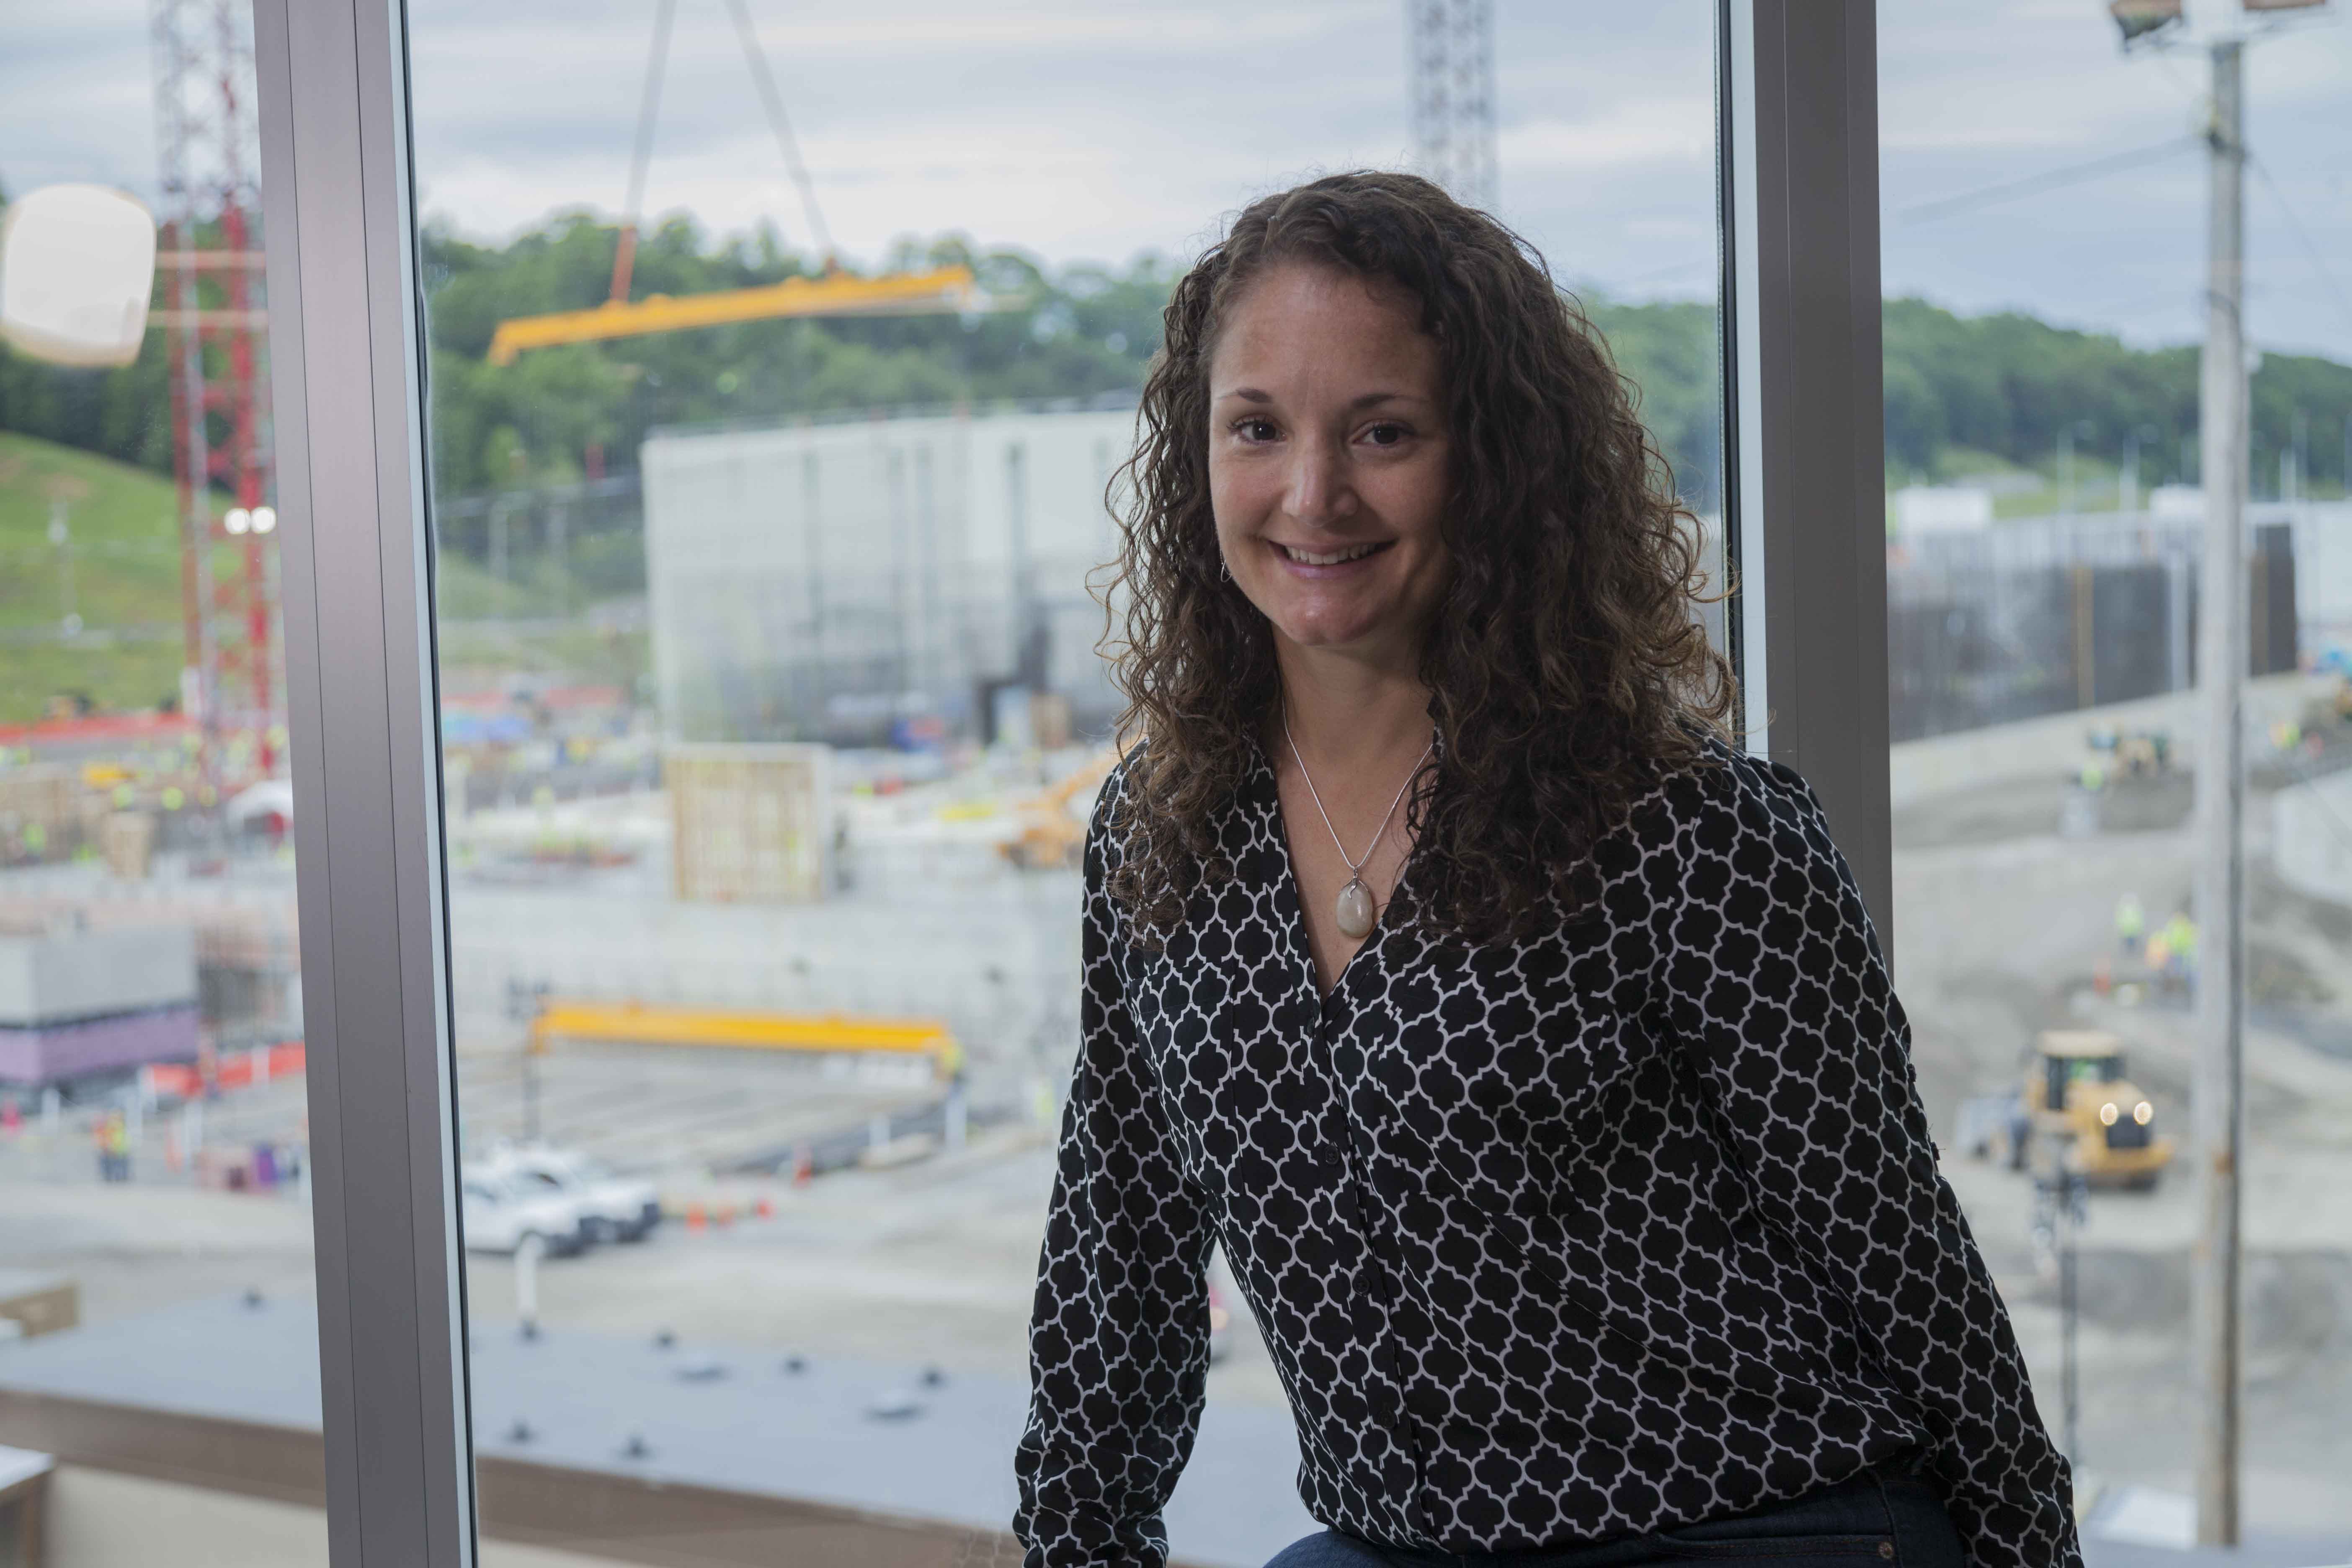 Laura is a subcontracts administrator at the Uranium Processing Facility (UPF) Project. She has been building UPF since 2015 on the Acquisition Services team. Laura manages service and construction contracts, working with local and national companies that bid on work to support the construction of UPF.